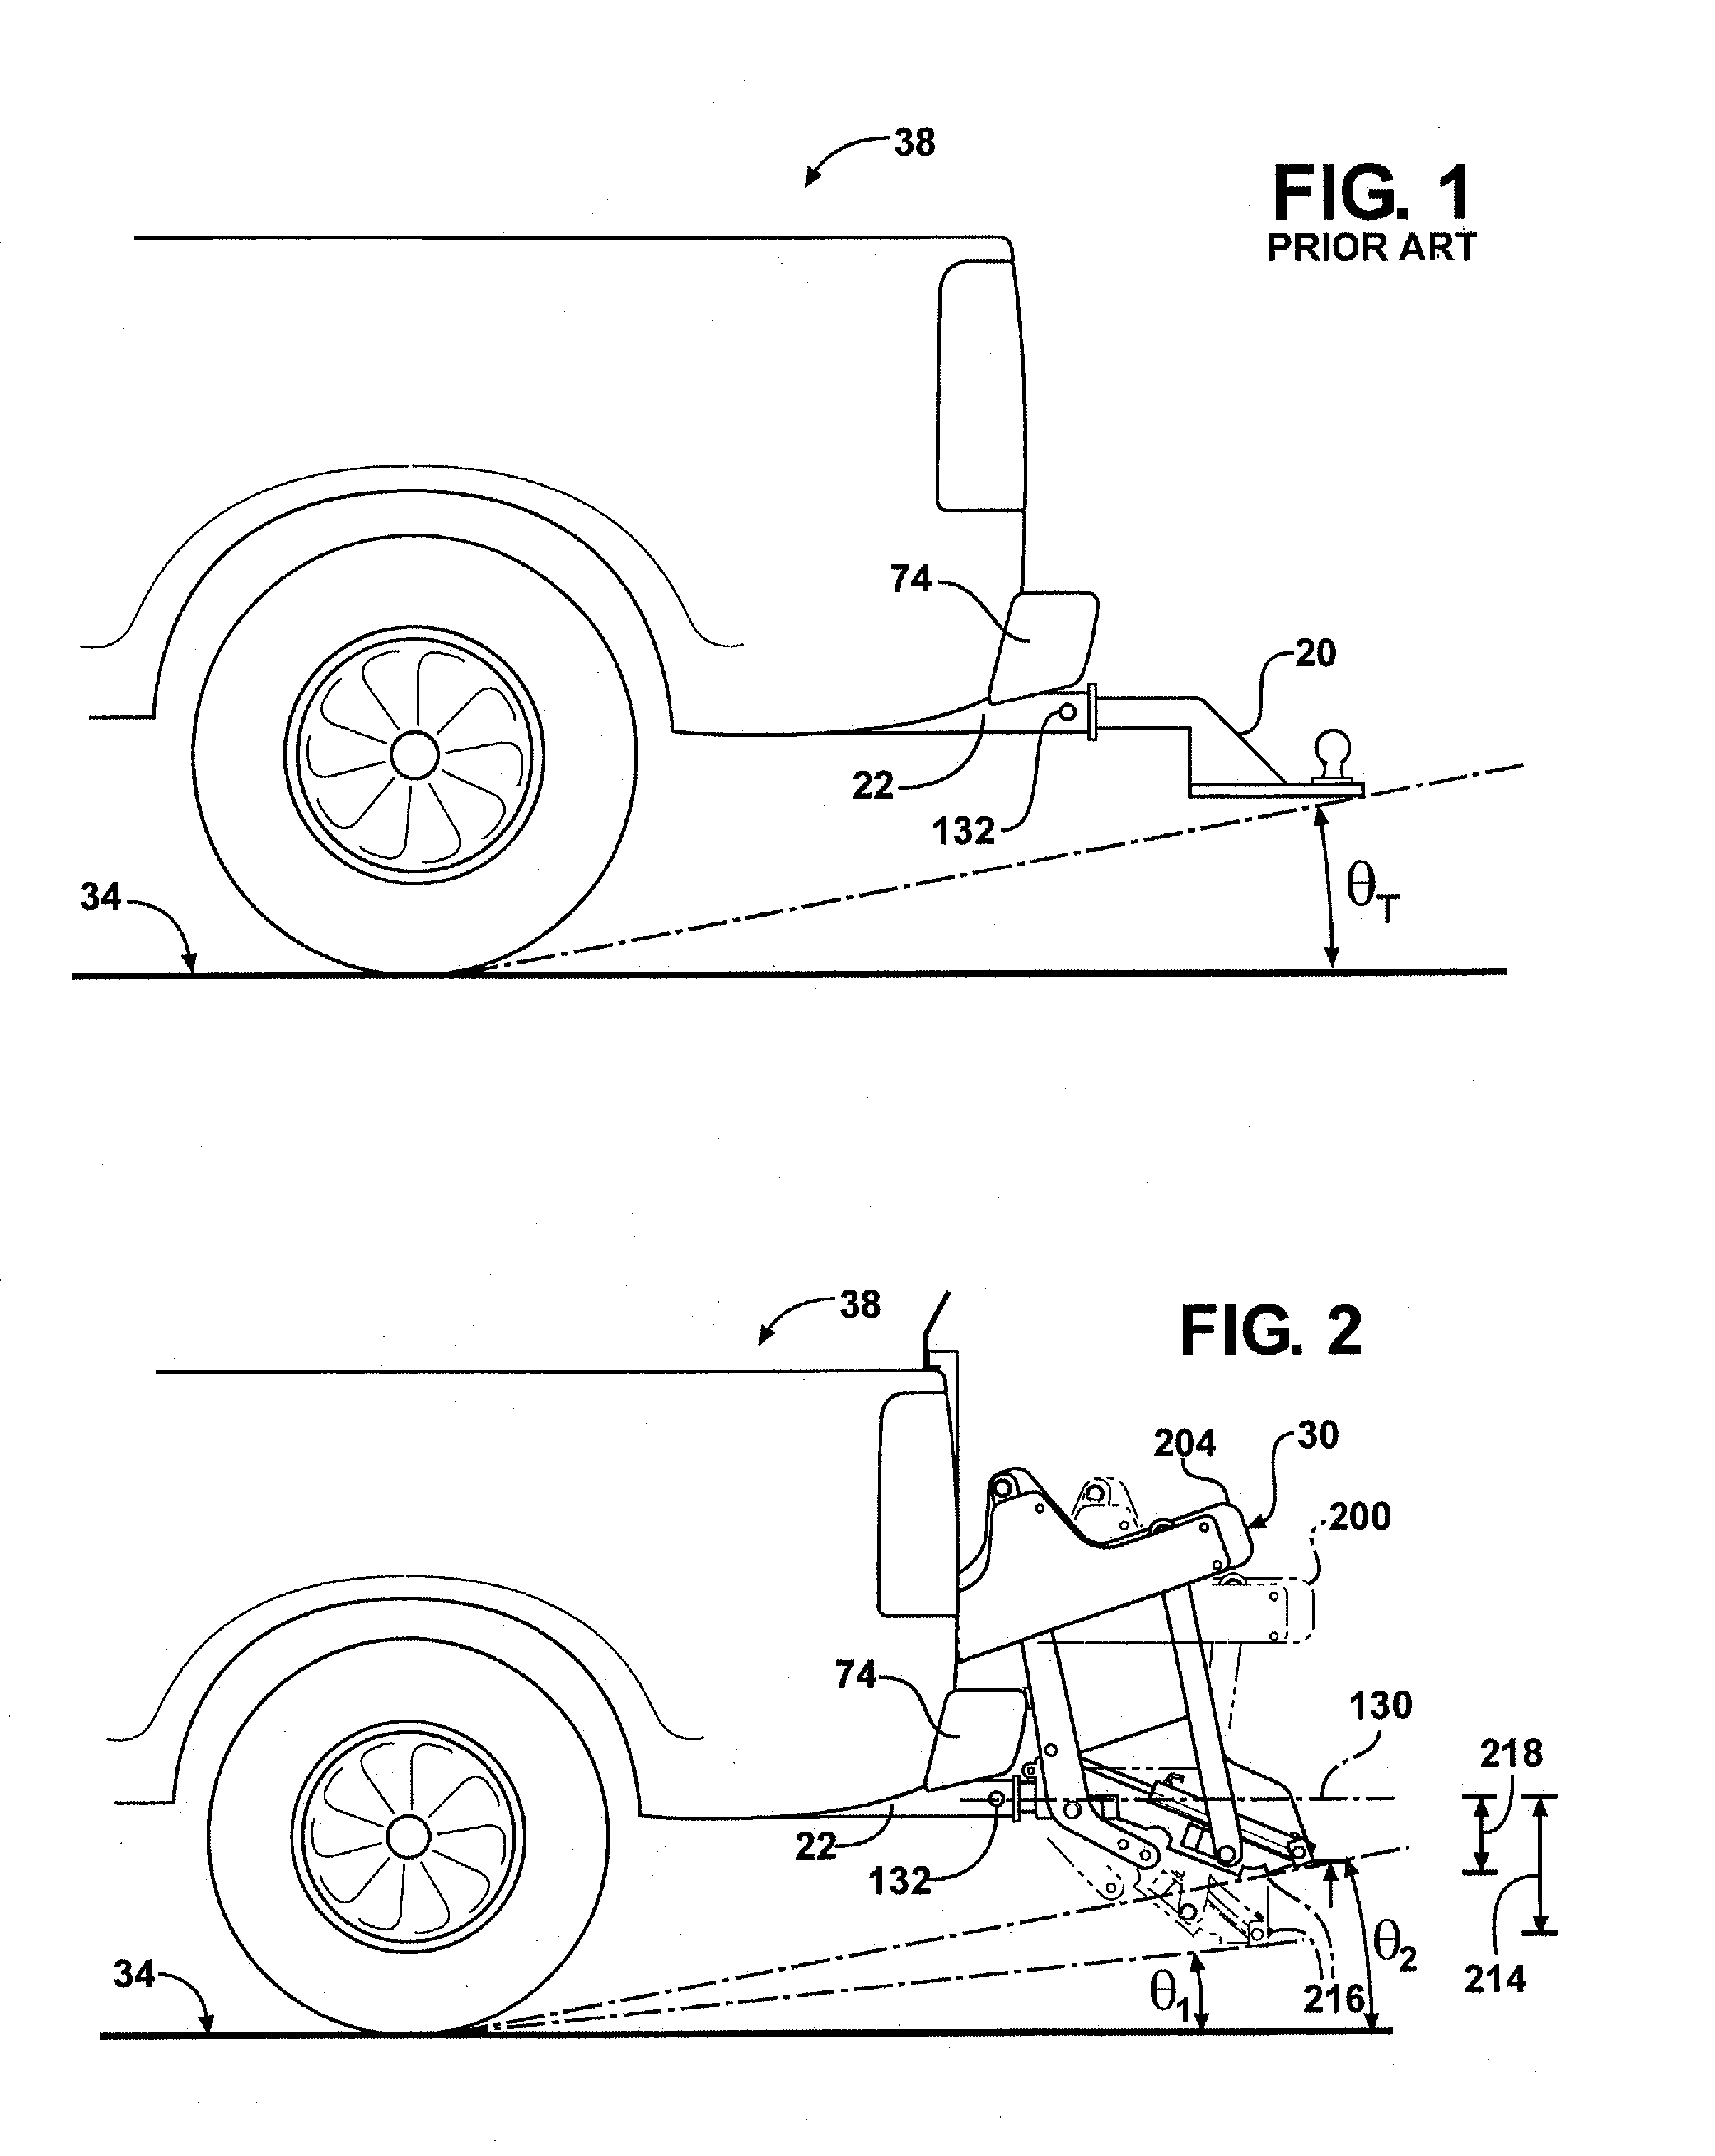 Lift assembly for a vehicle